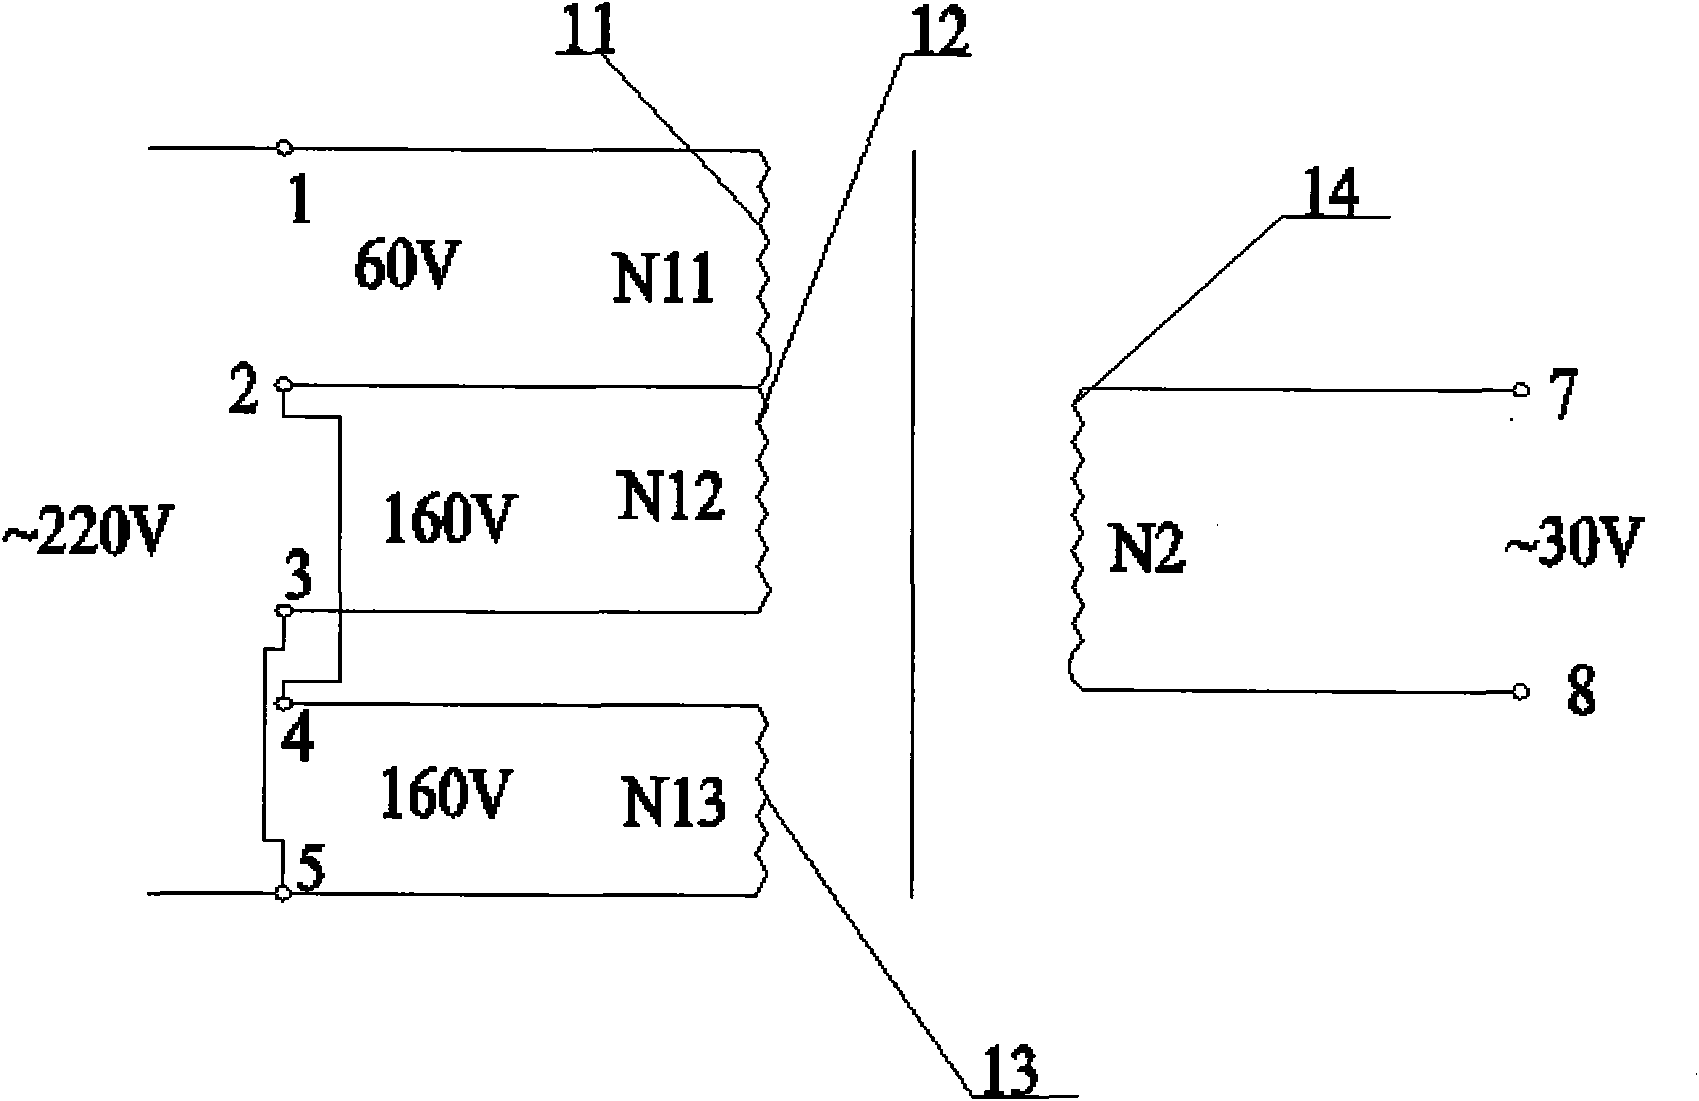 Primary coil winding structure of power supply transformer